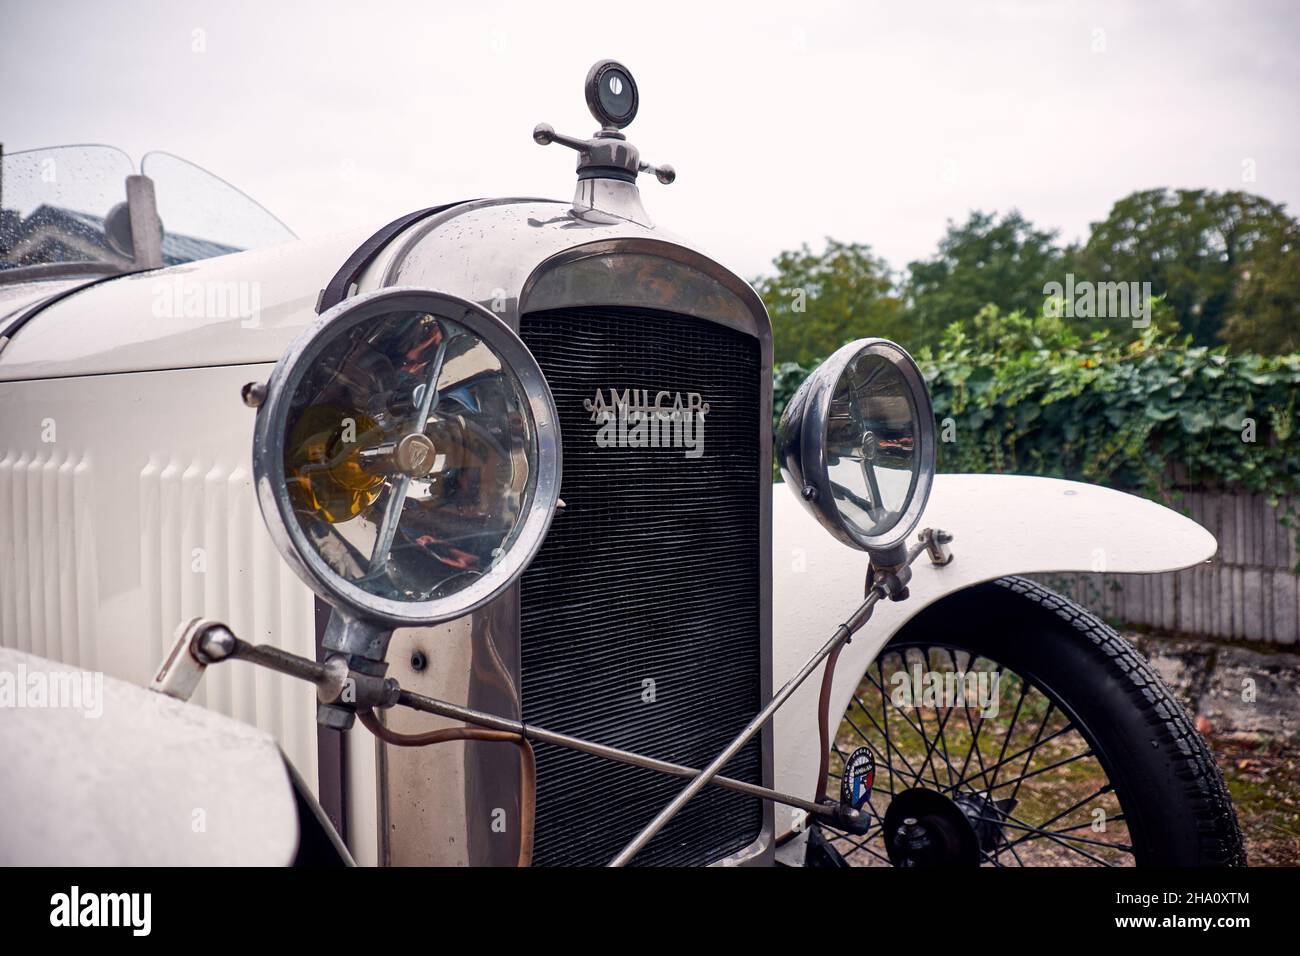 Amilcar vintage roadster front view Stock Photo